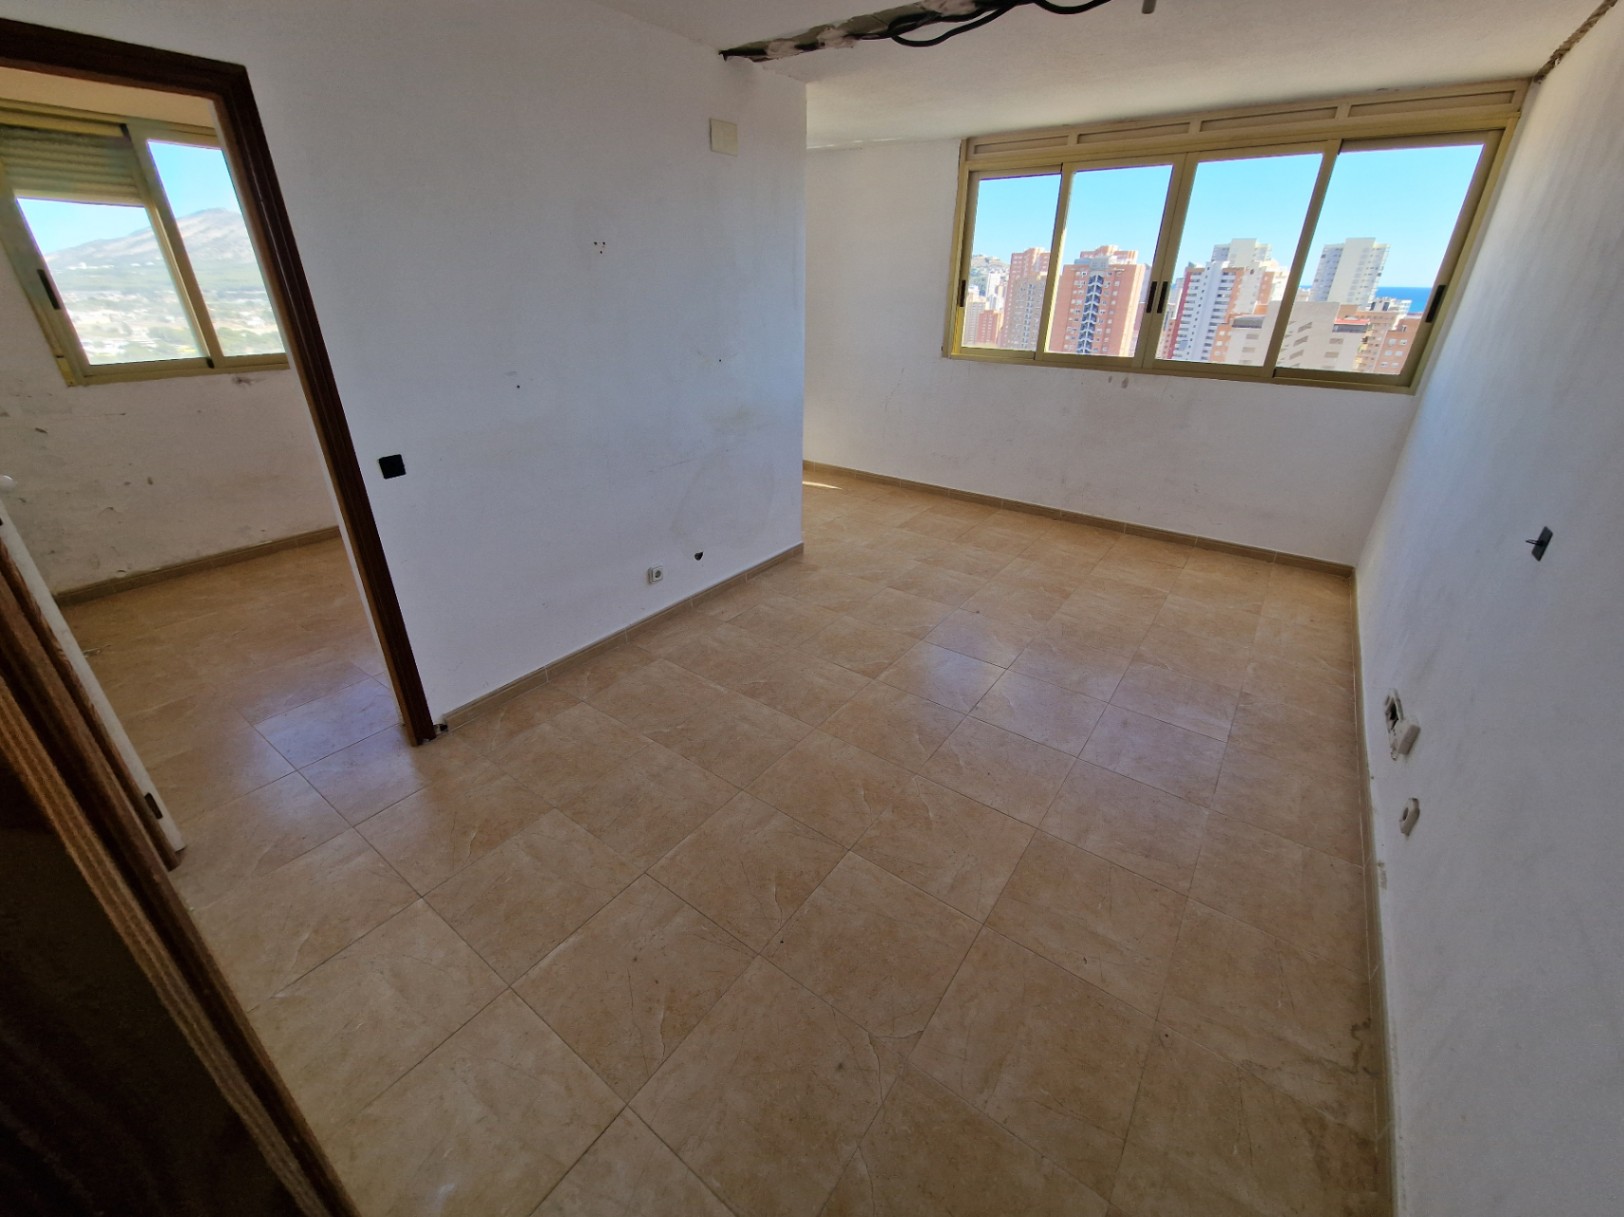 Apartment with views of the sea and the whole of Benidorm